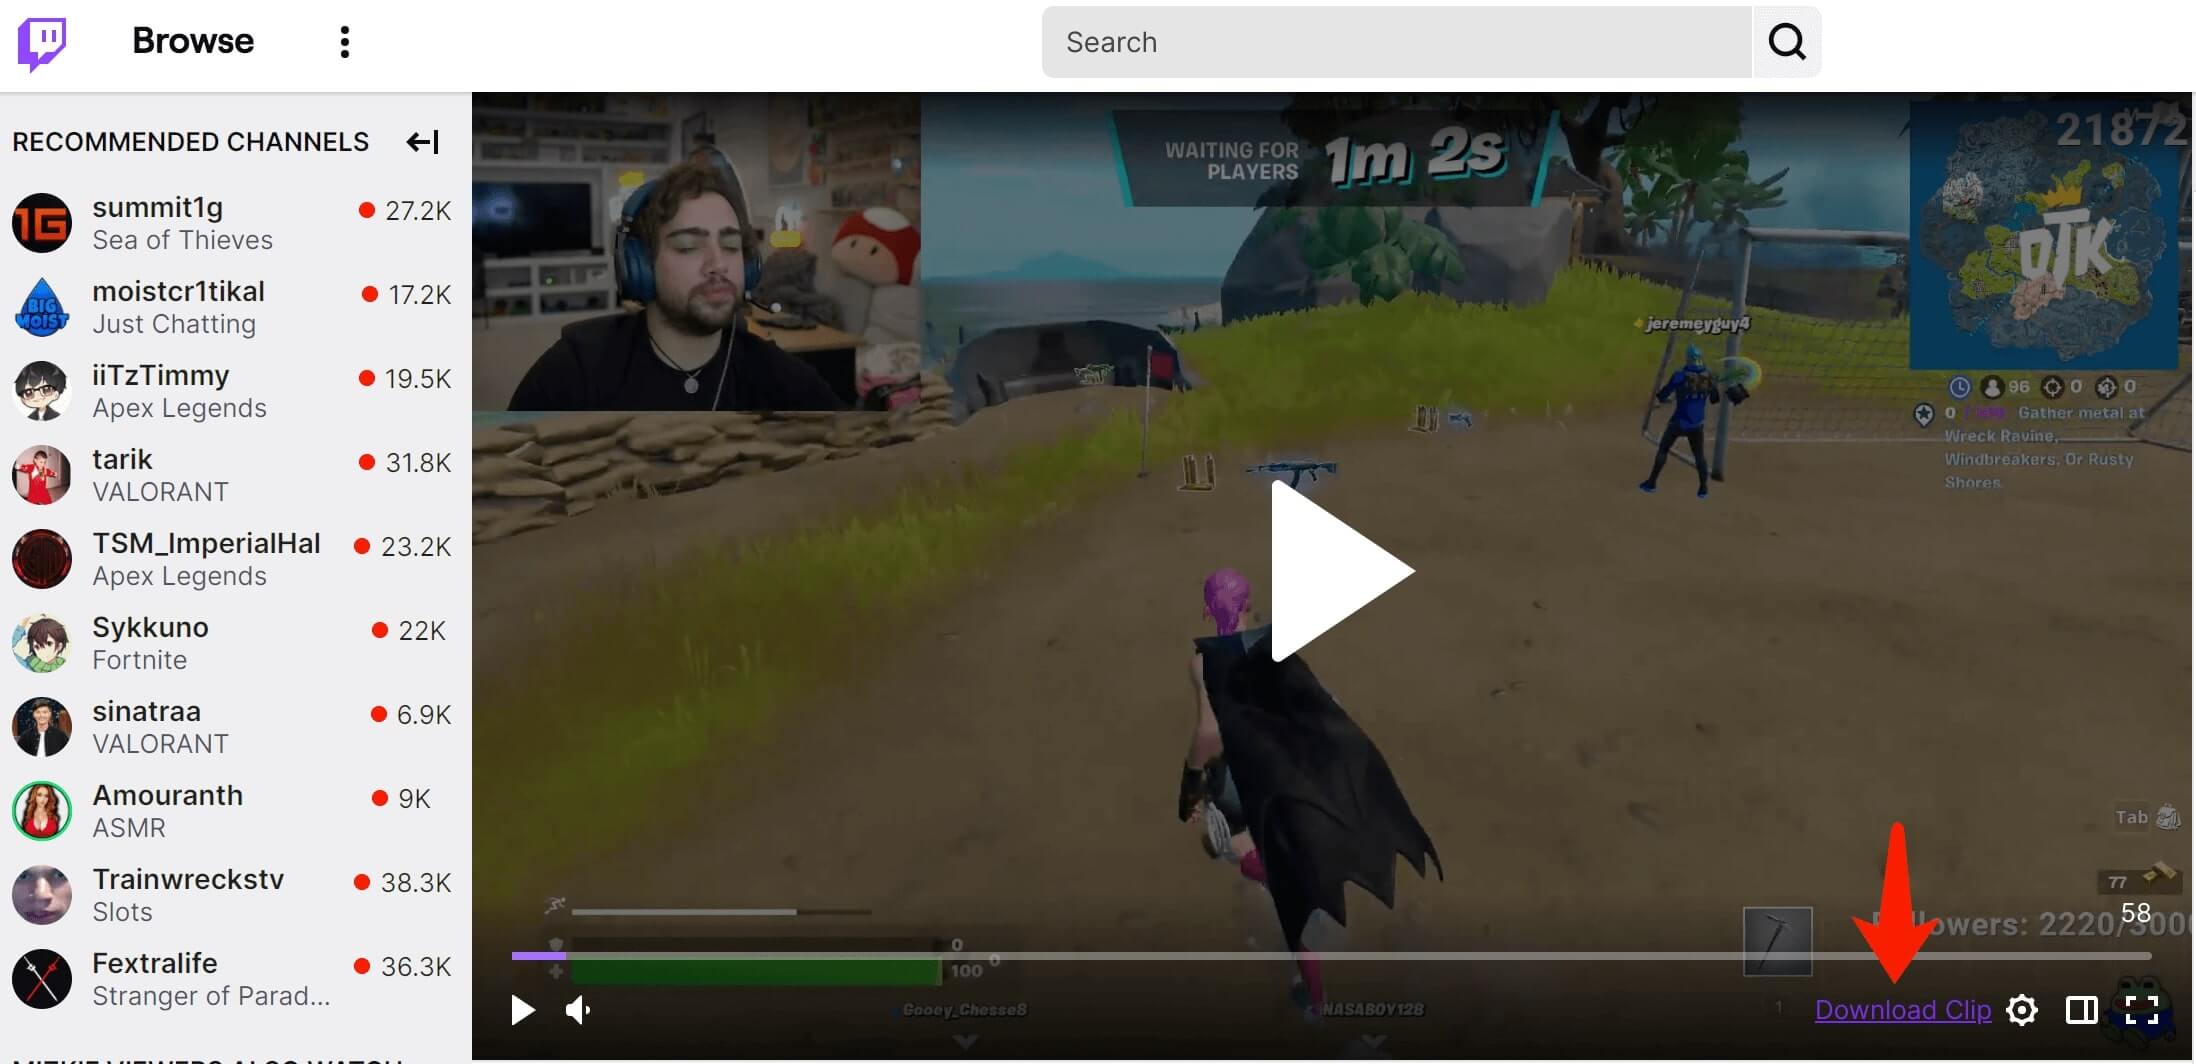  How-to-download-Twitch-clips-with-Chrome-extension 